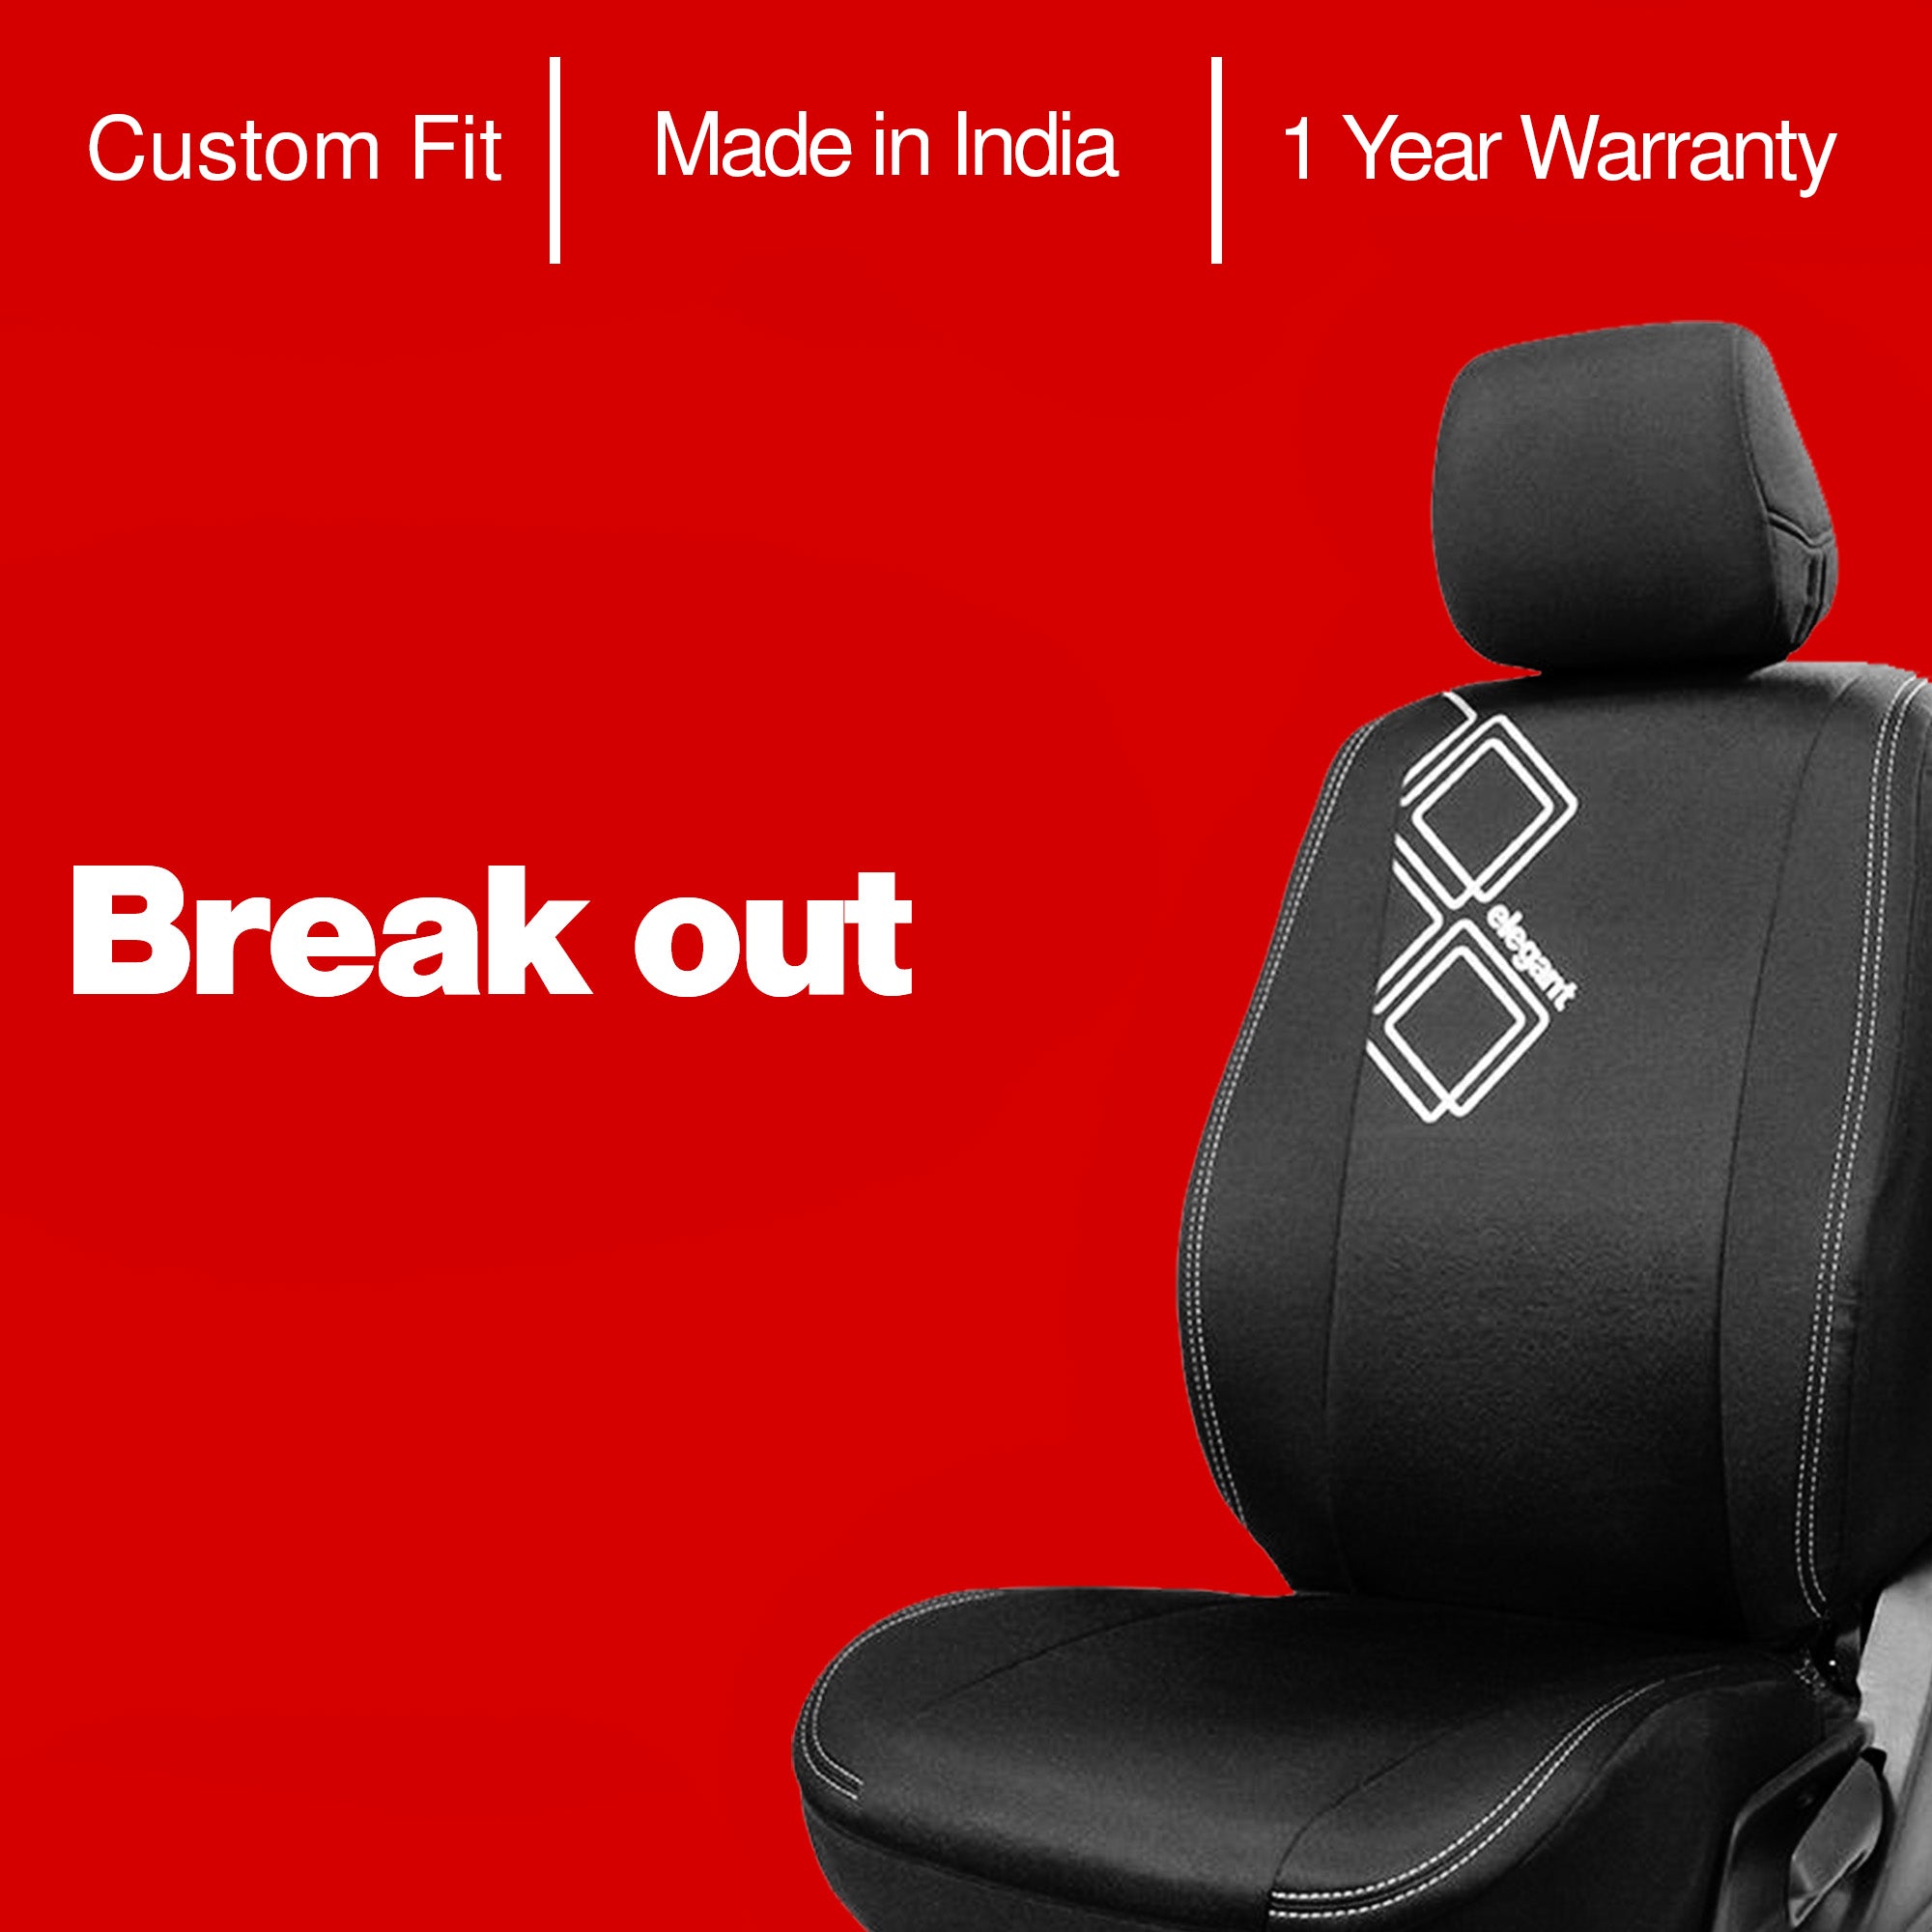 Yolo Fabric Car Seat Cover For Renault Triber – Elegant Auto Retail